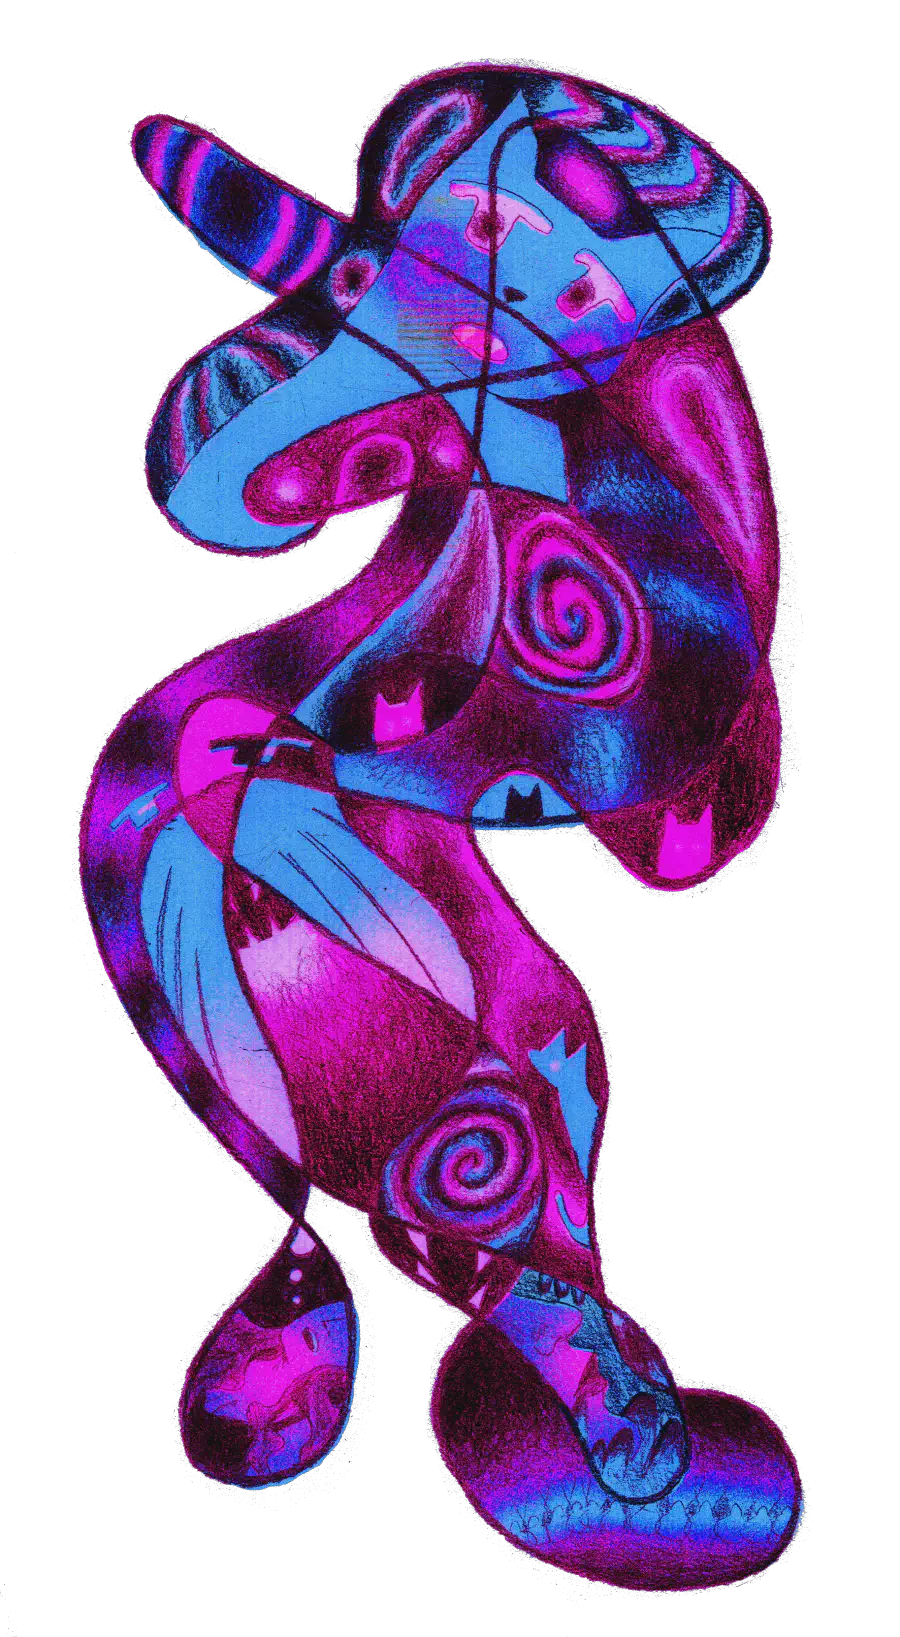 A transparent render of a distorted pink and purple creature that looks distressed. Many individual images make up its twisted body. Examples include cats silhoutted by darkness, parts of faces, and colorful swirls. The creature seems to be attempting to walk.